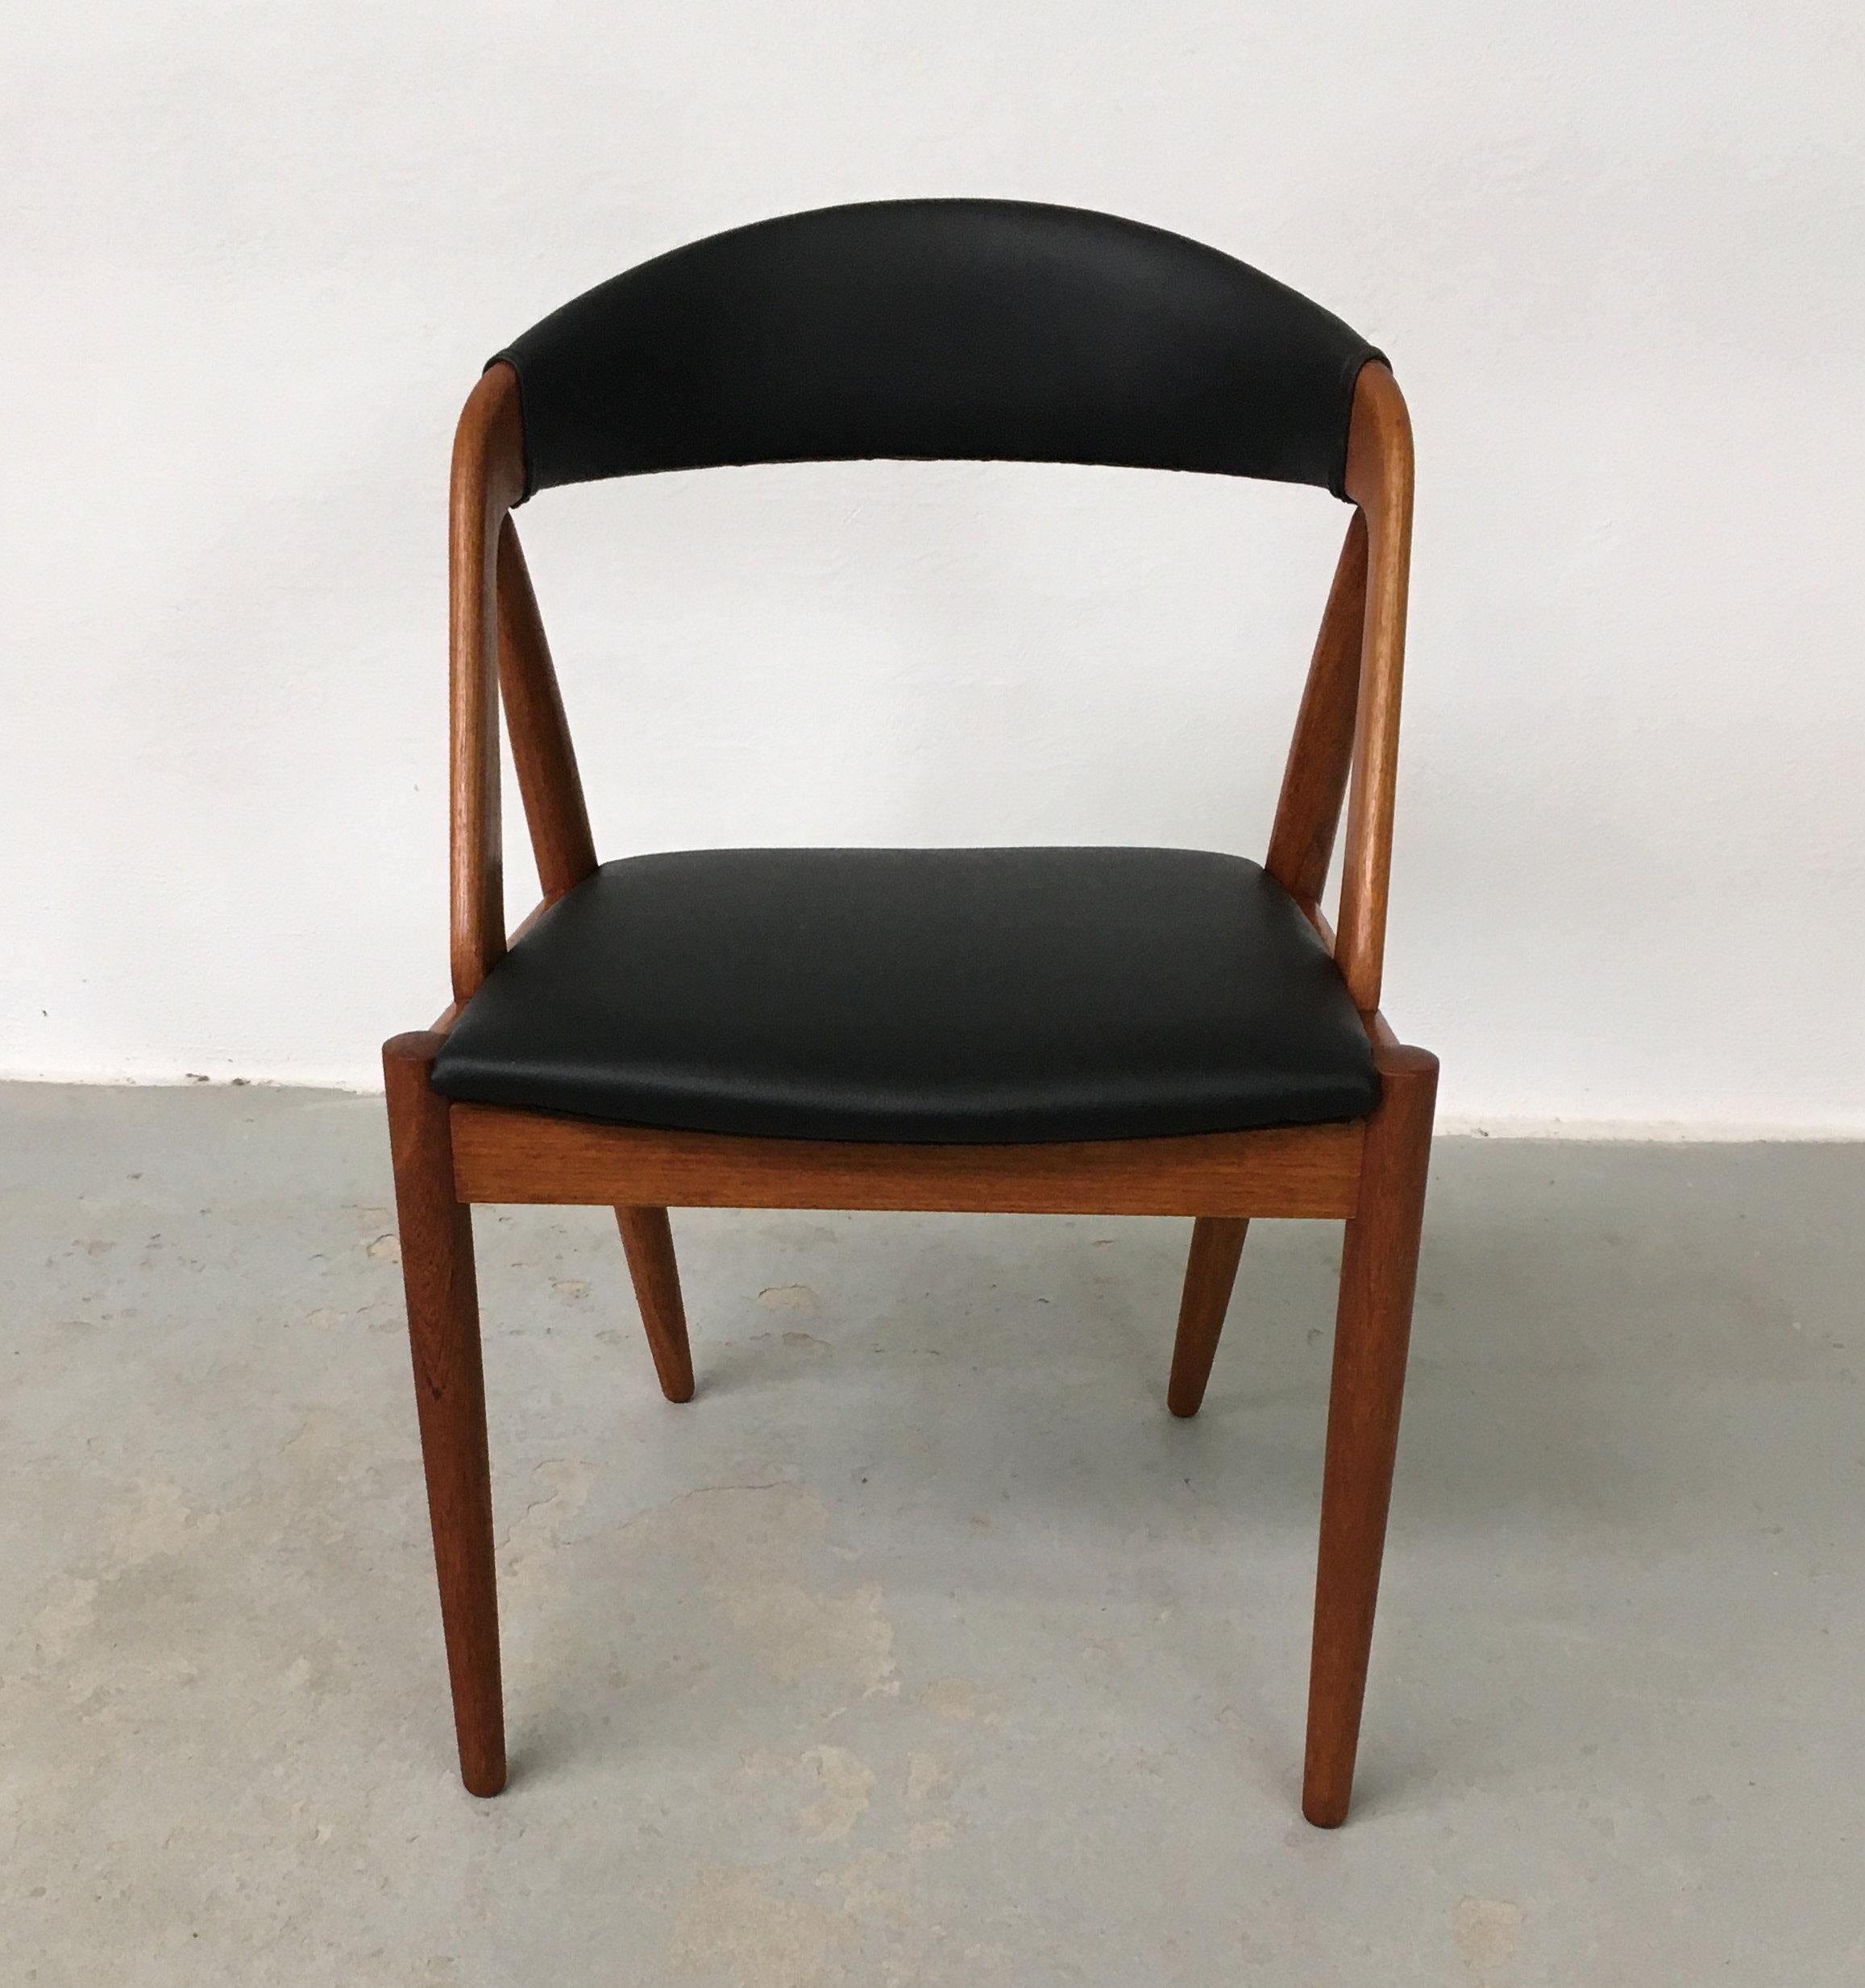 Kai Kristiansen set of eight fully restored teak dining chairs by Schou Andersens Møbel Fabrik including custom upholstery.

The A-frame model 31 dining chairs were designed by Kai Kristiansen in 1956 for Schou-Andersens Møbelfabrik and the A-frame